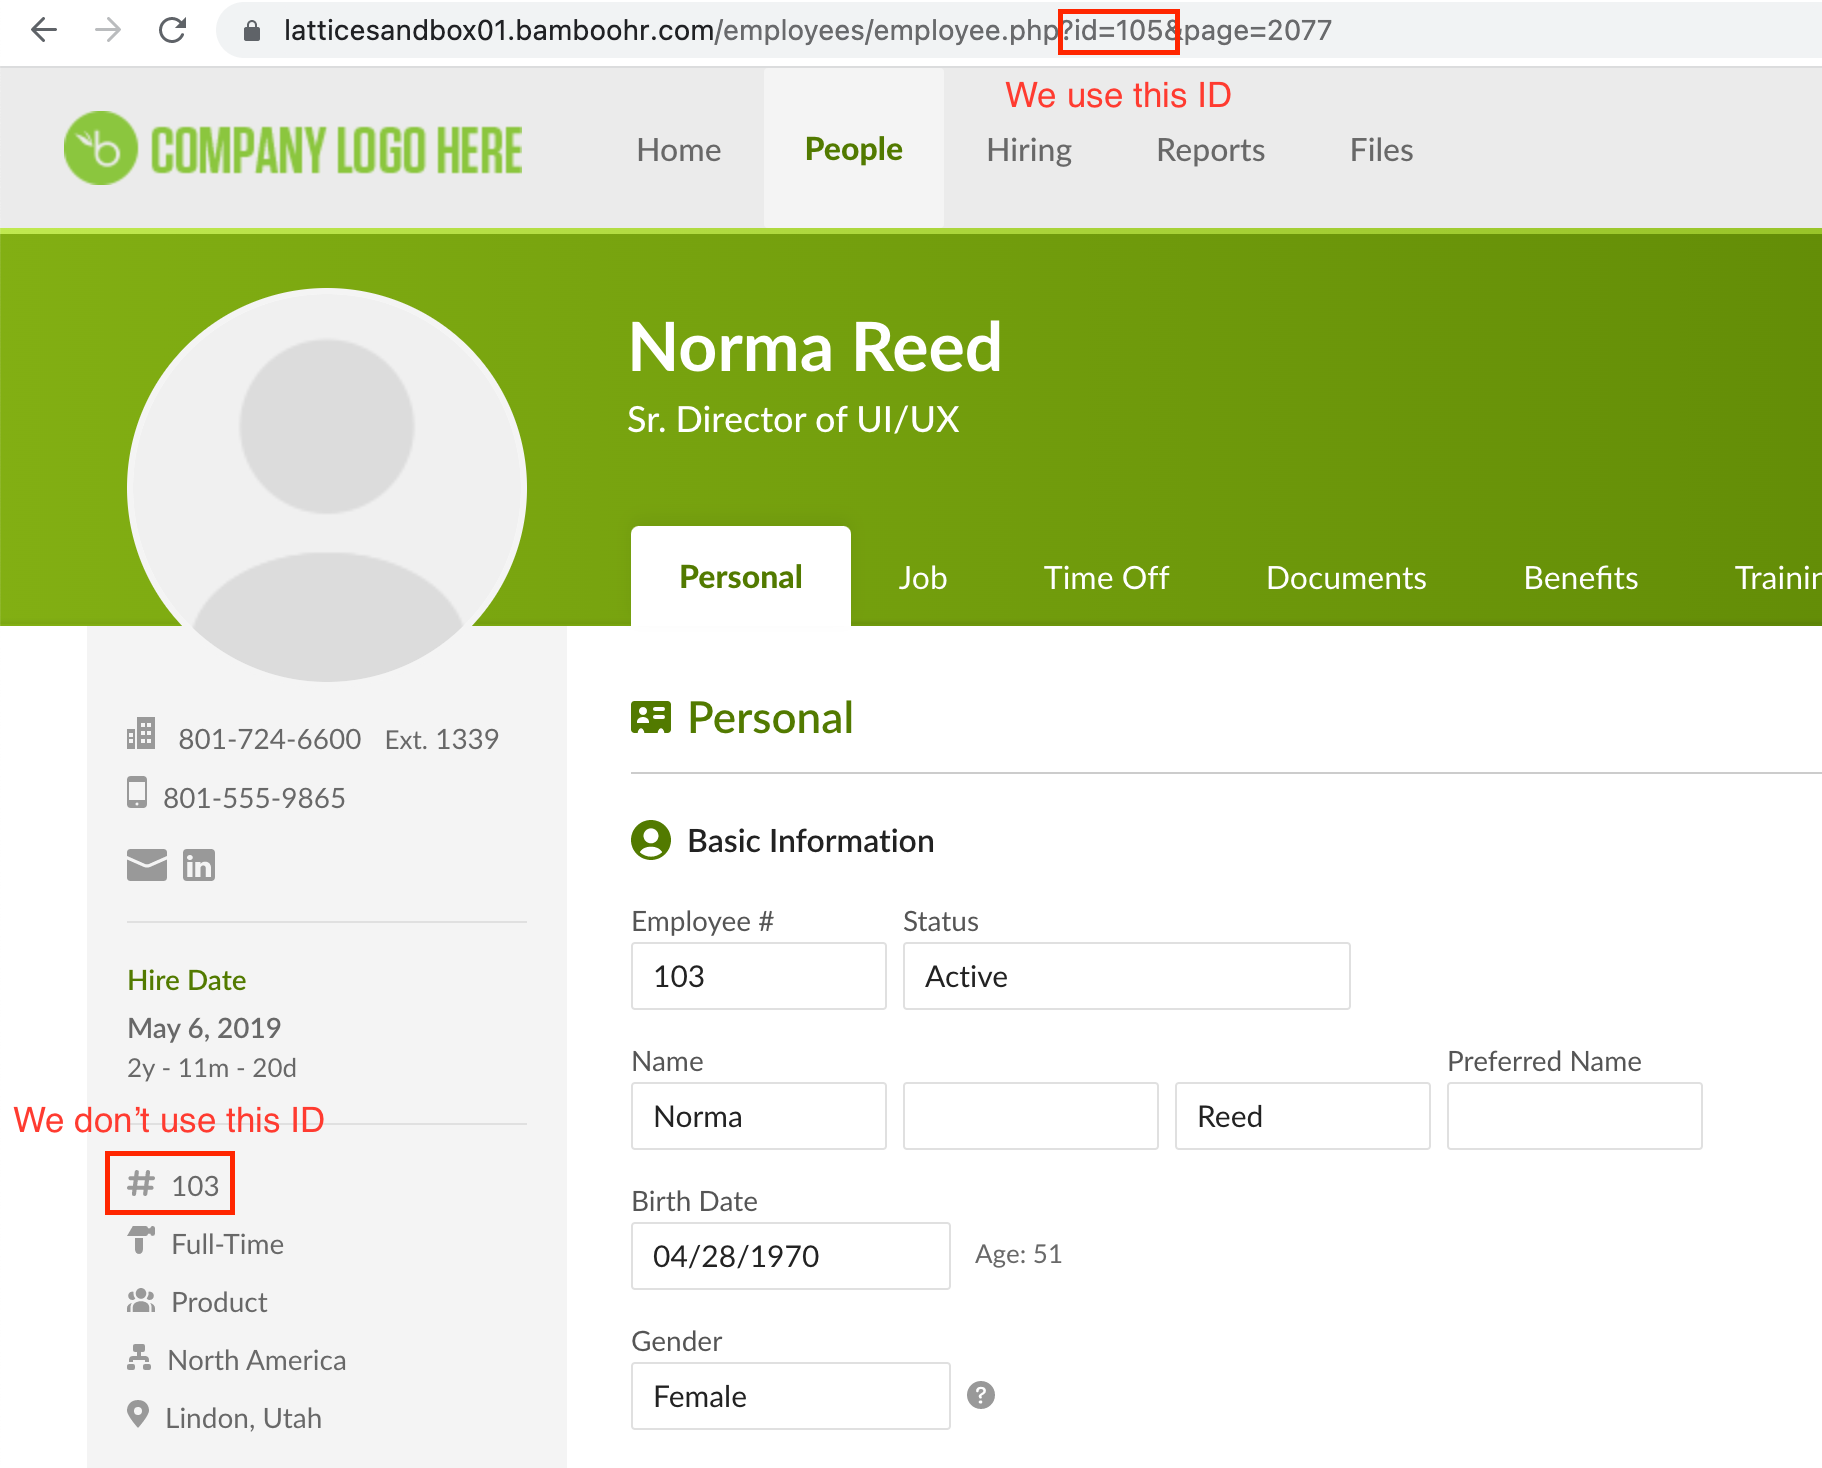 Image of BambooHR platform with a red, square box highlighting the ID in the URL and a note We use this ID.